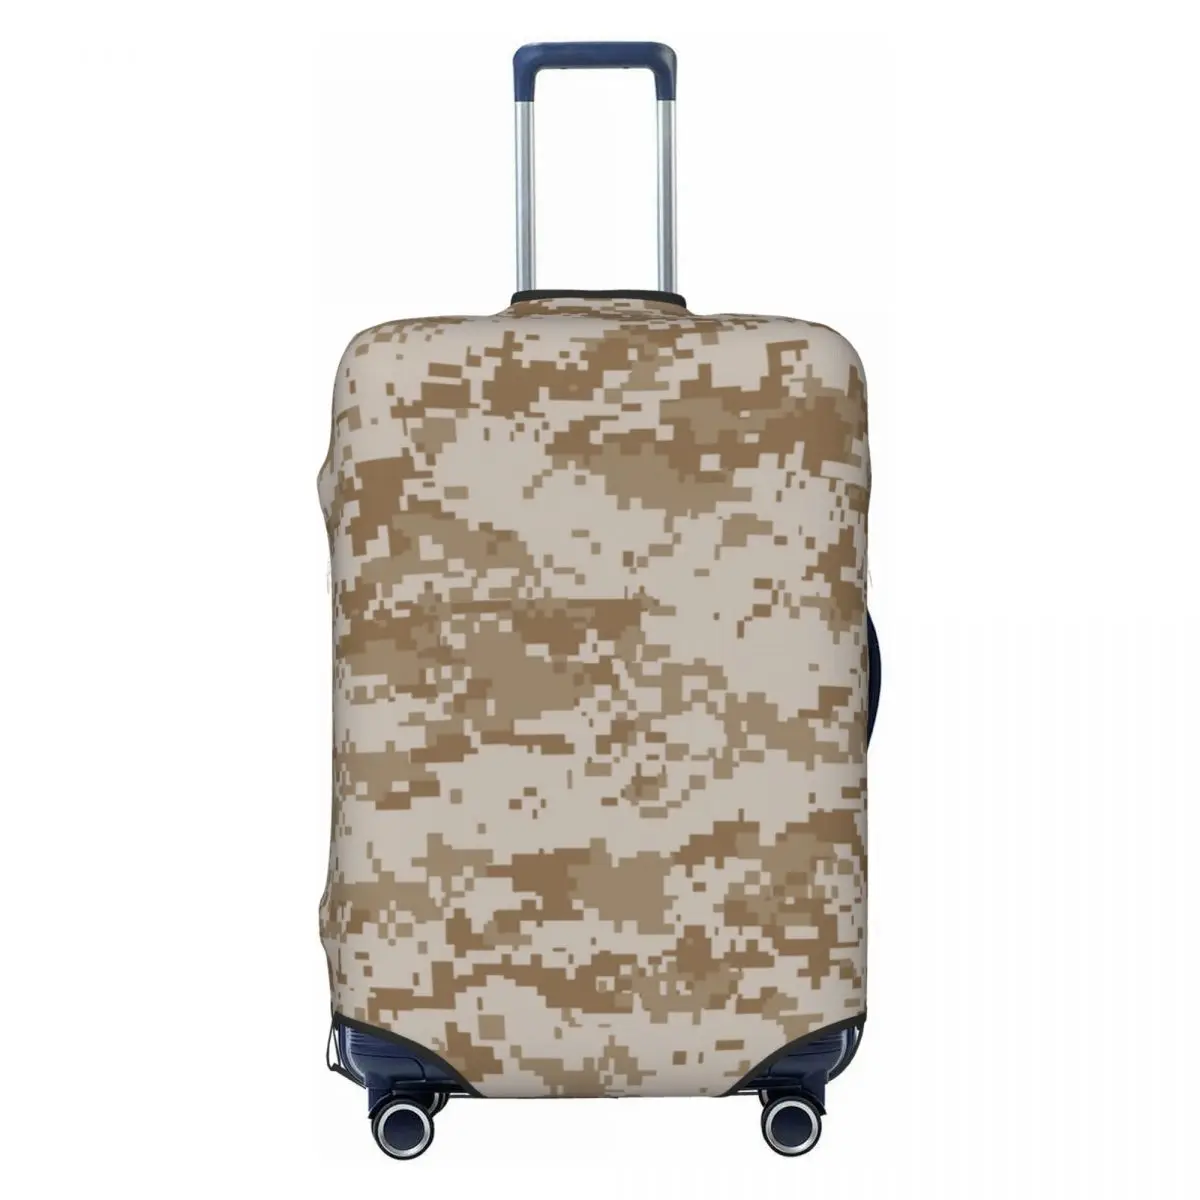 

Custom Digital Desert Camo Luggage Cover Funny Military Army Camouflage Suitcase Protector Covers Suit For 18-32 inch